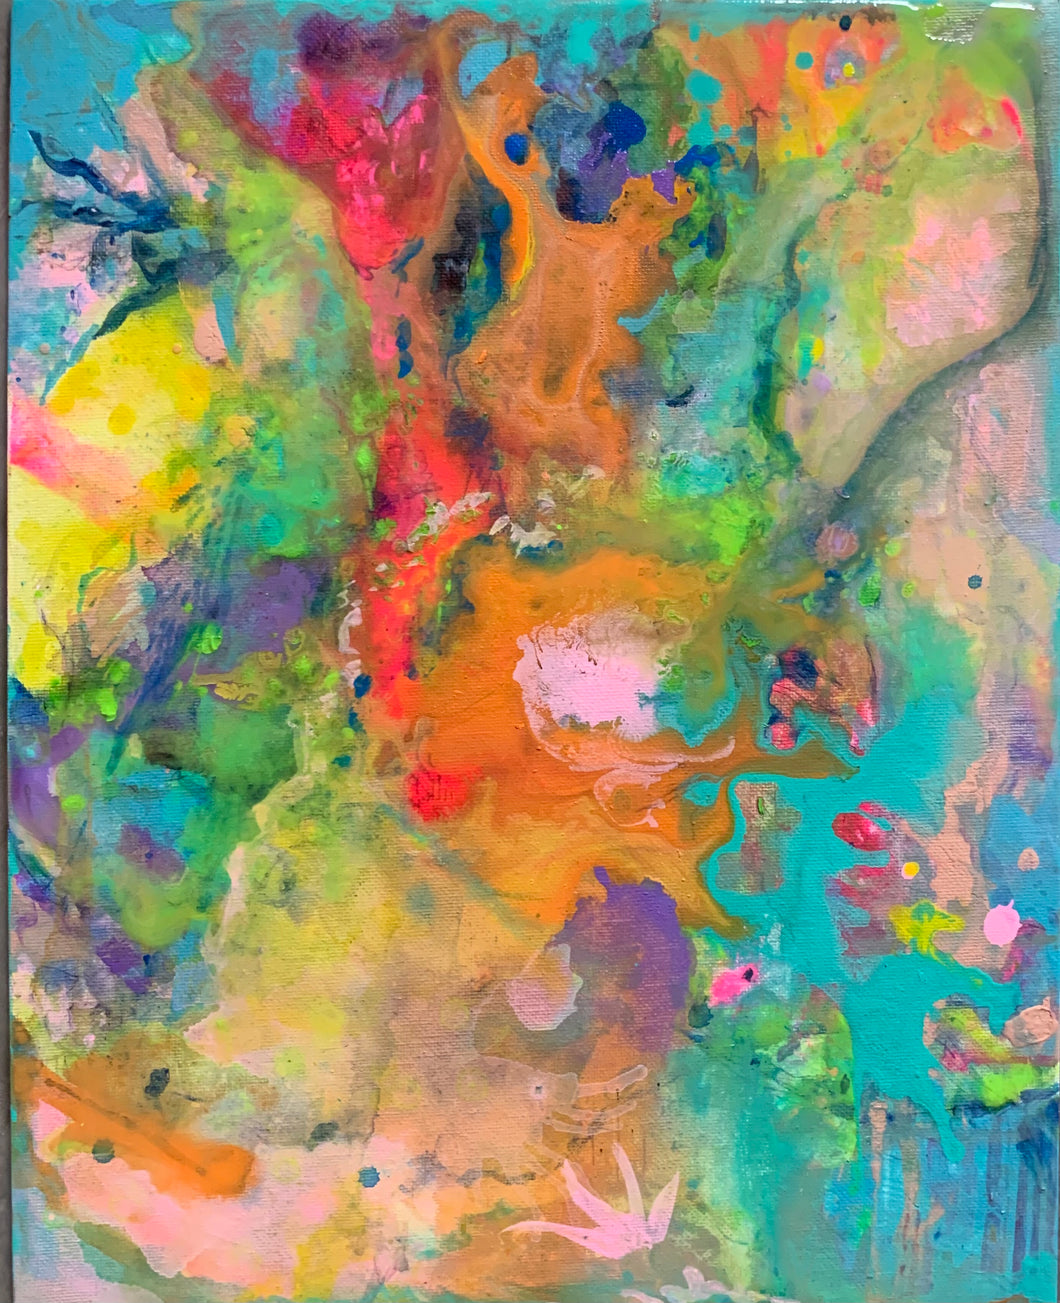 The Tree of Life | 11 x 14 in. | Acrylic on canvas.